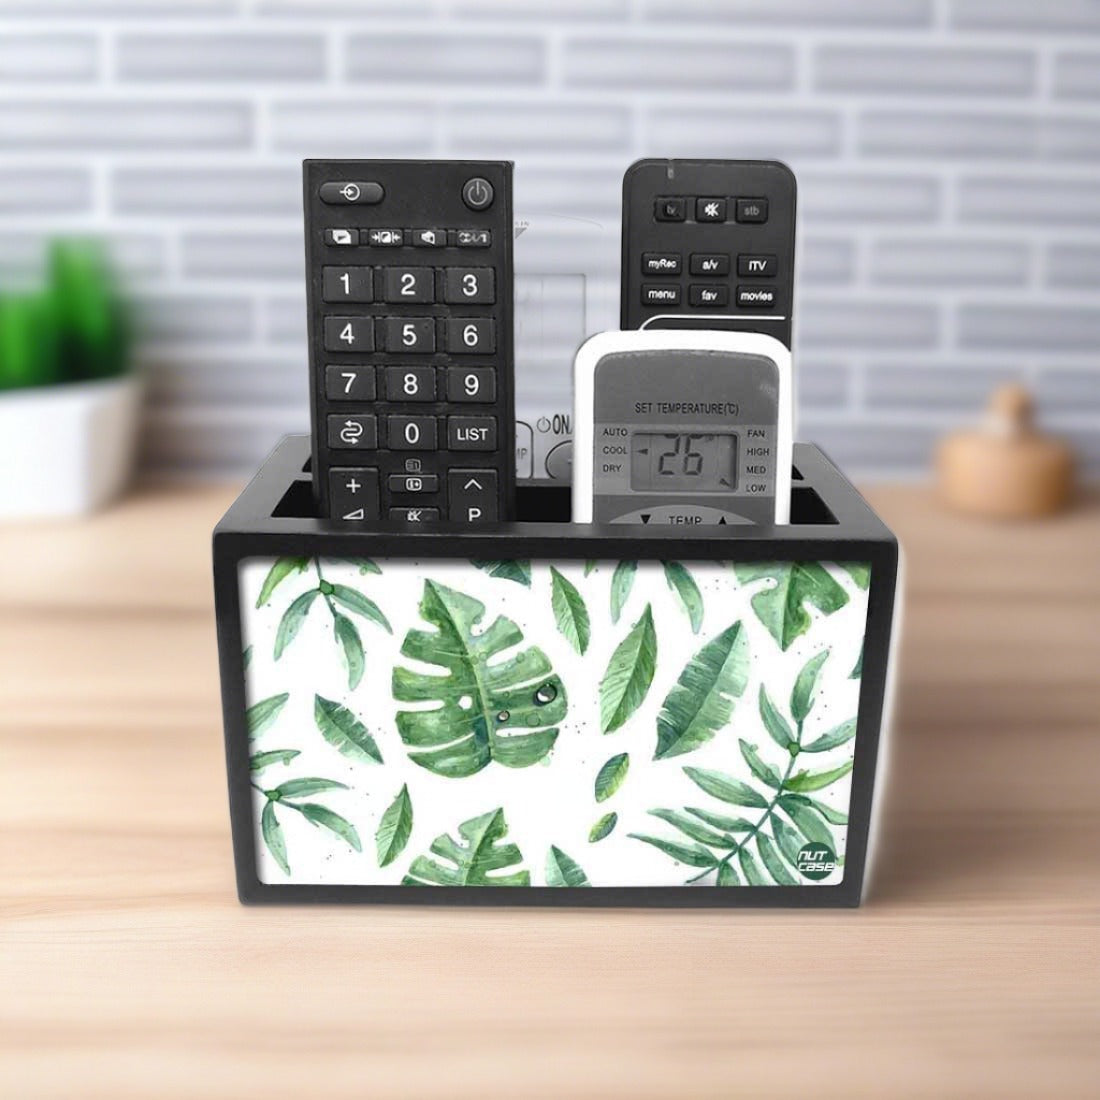 Tv Remote Control Holder For TV / AC Remotes -  Happy Leaves Nutcase